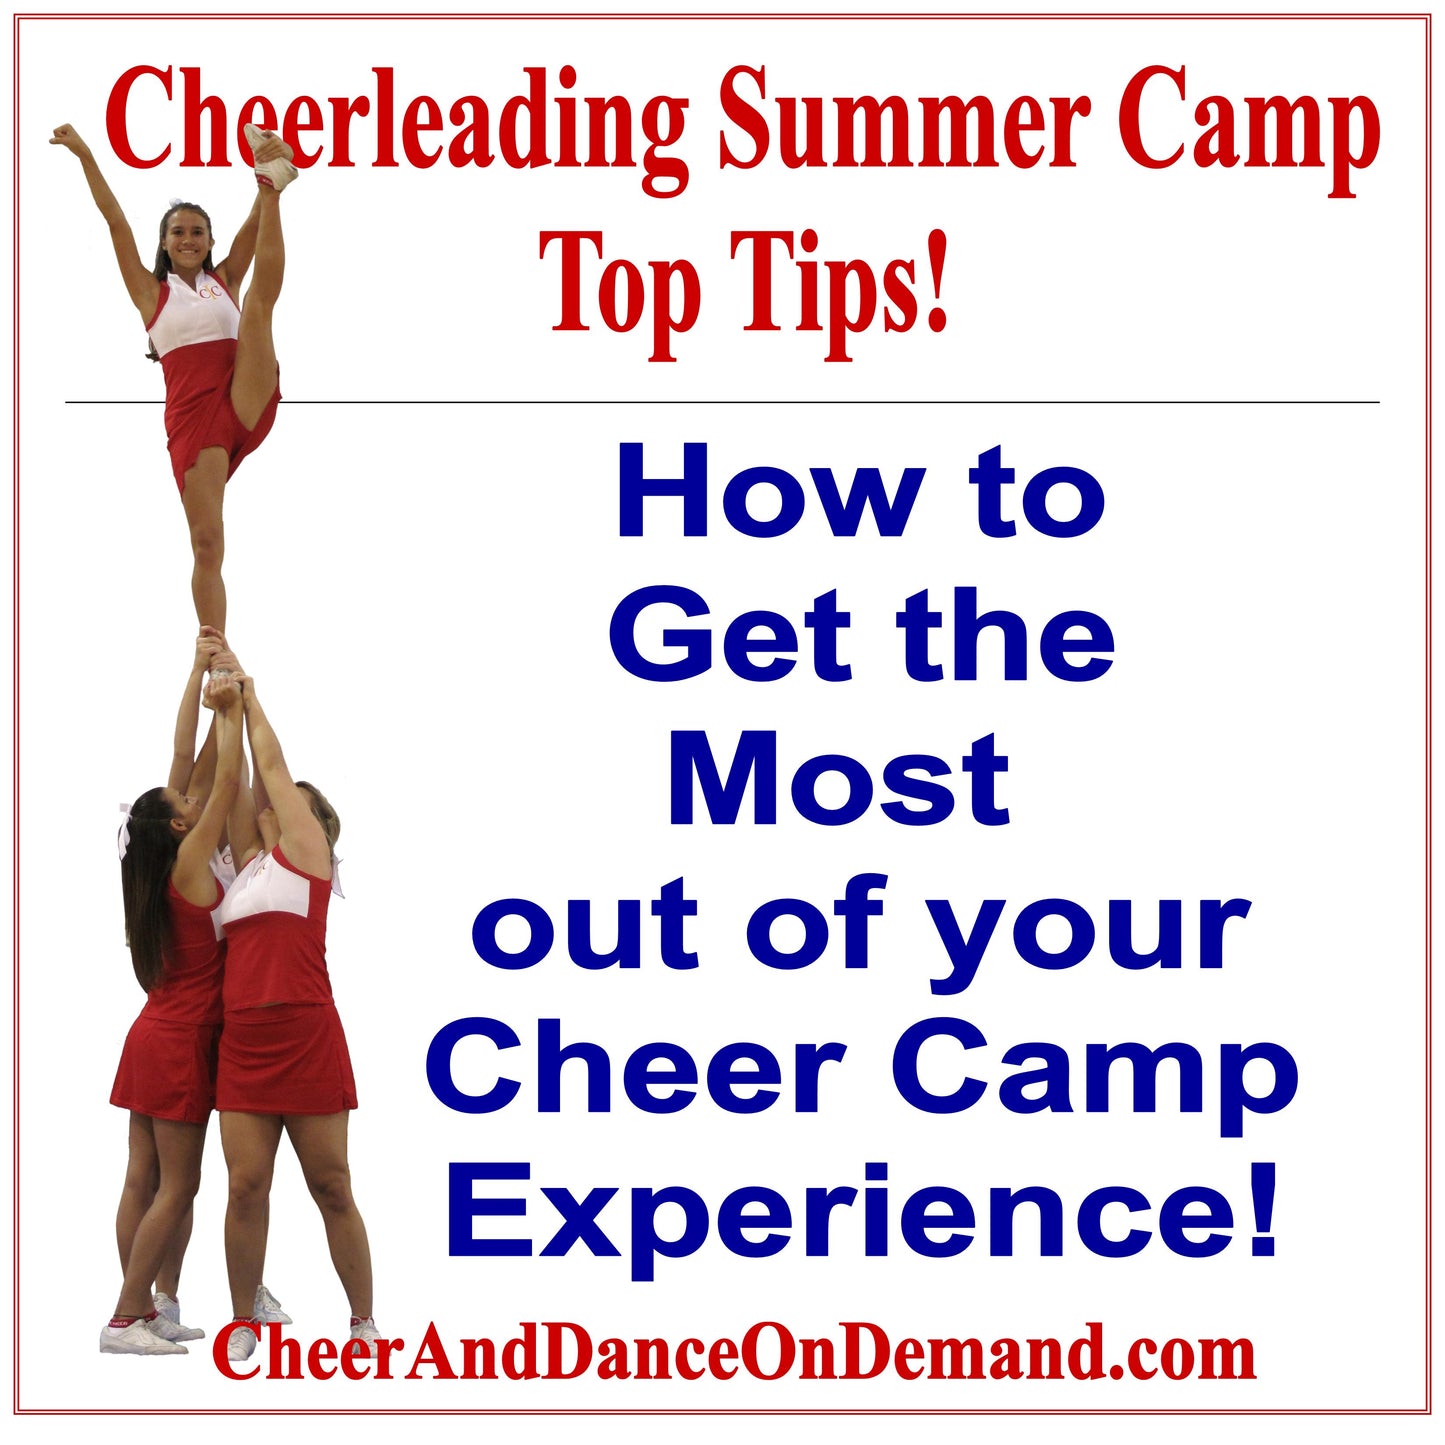 How to Make the Most of Your Cheerleading Summer Camp